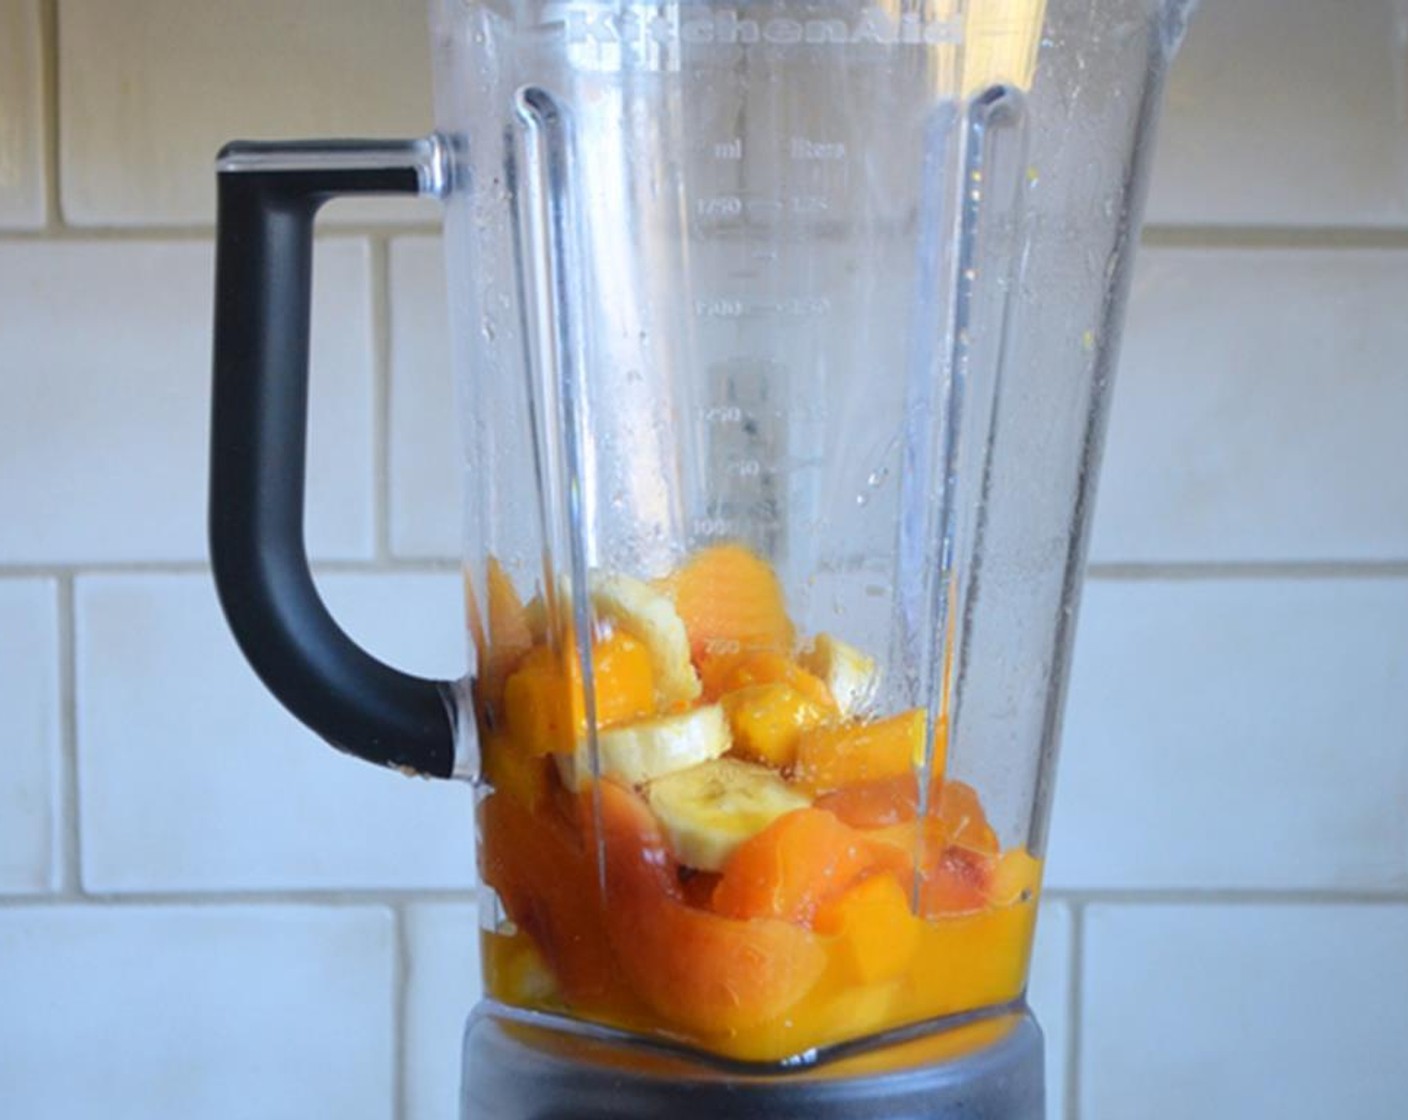 step 1 Combine Peach (1 cup), Mango (1/2 cup), Mango Nectar (1/4 cup), Banana (1/2), Granulated Sugar (1/2 Tbsp), if using, and Ice (to taste) in a blender.